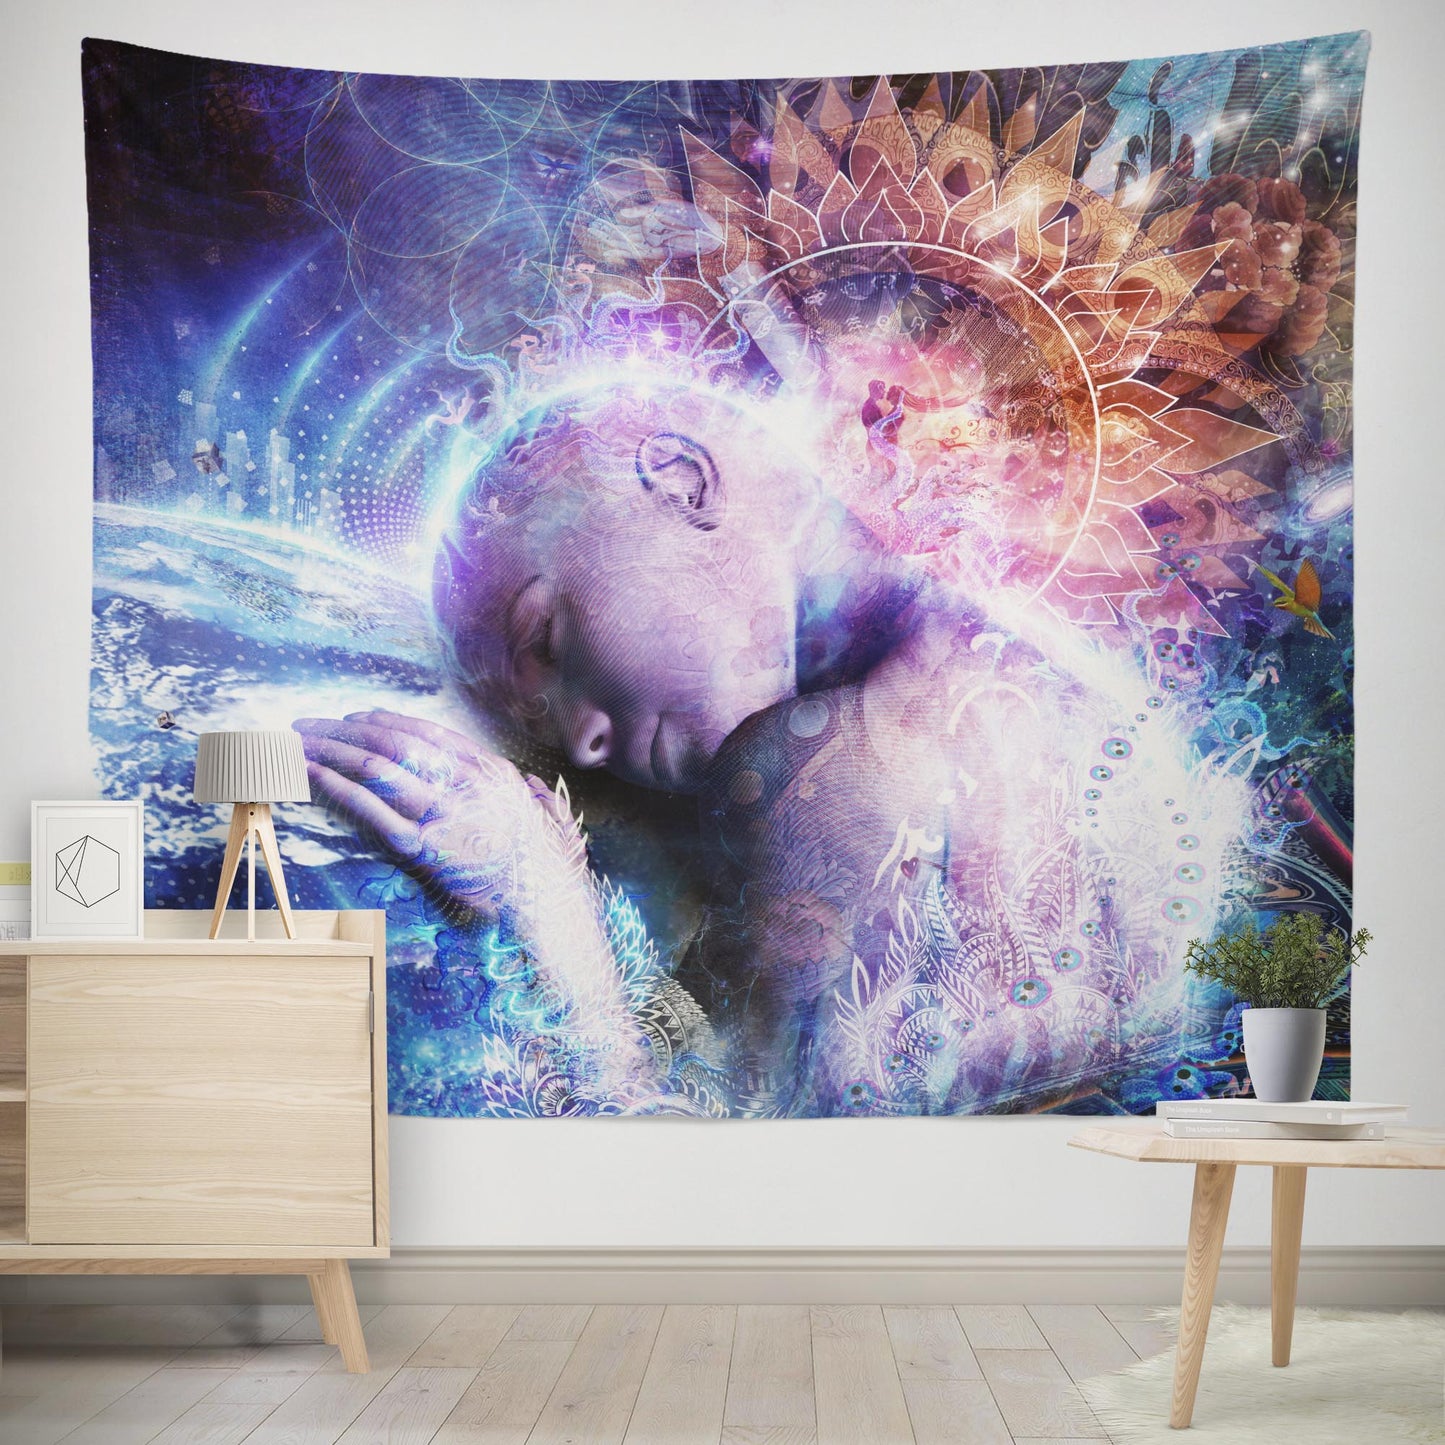 Cameron Gray art large wall tapestry